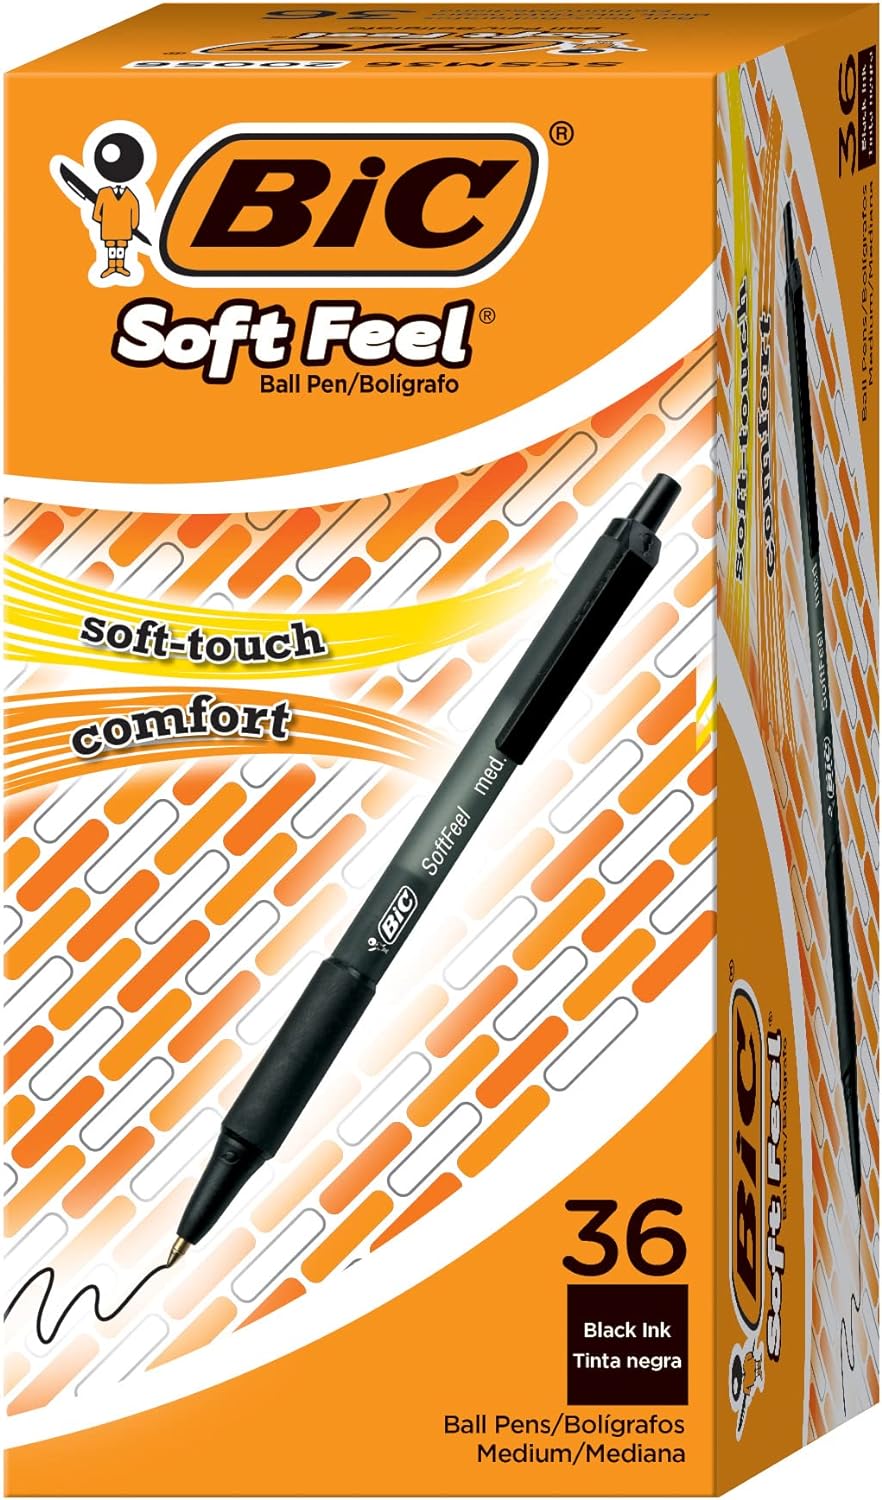 BIC Soft Feel Black Retractable Ballpoint Pens, Medium Point (1.0mm), 36-Count Pack, Black Pens With Soft-Touch Comfort Grip